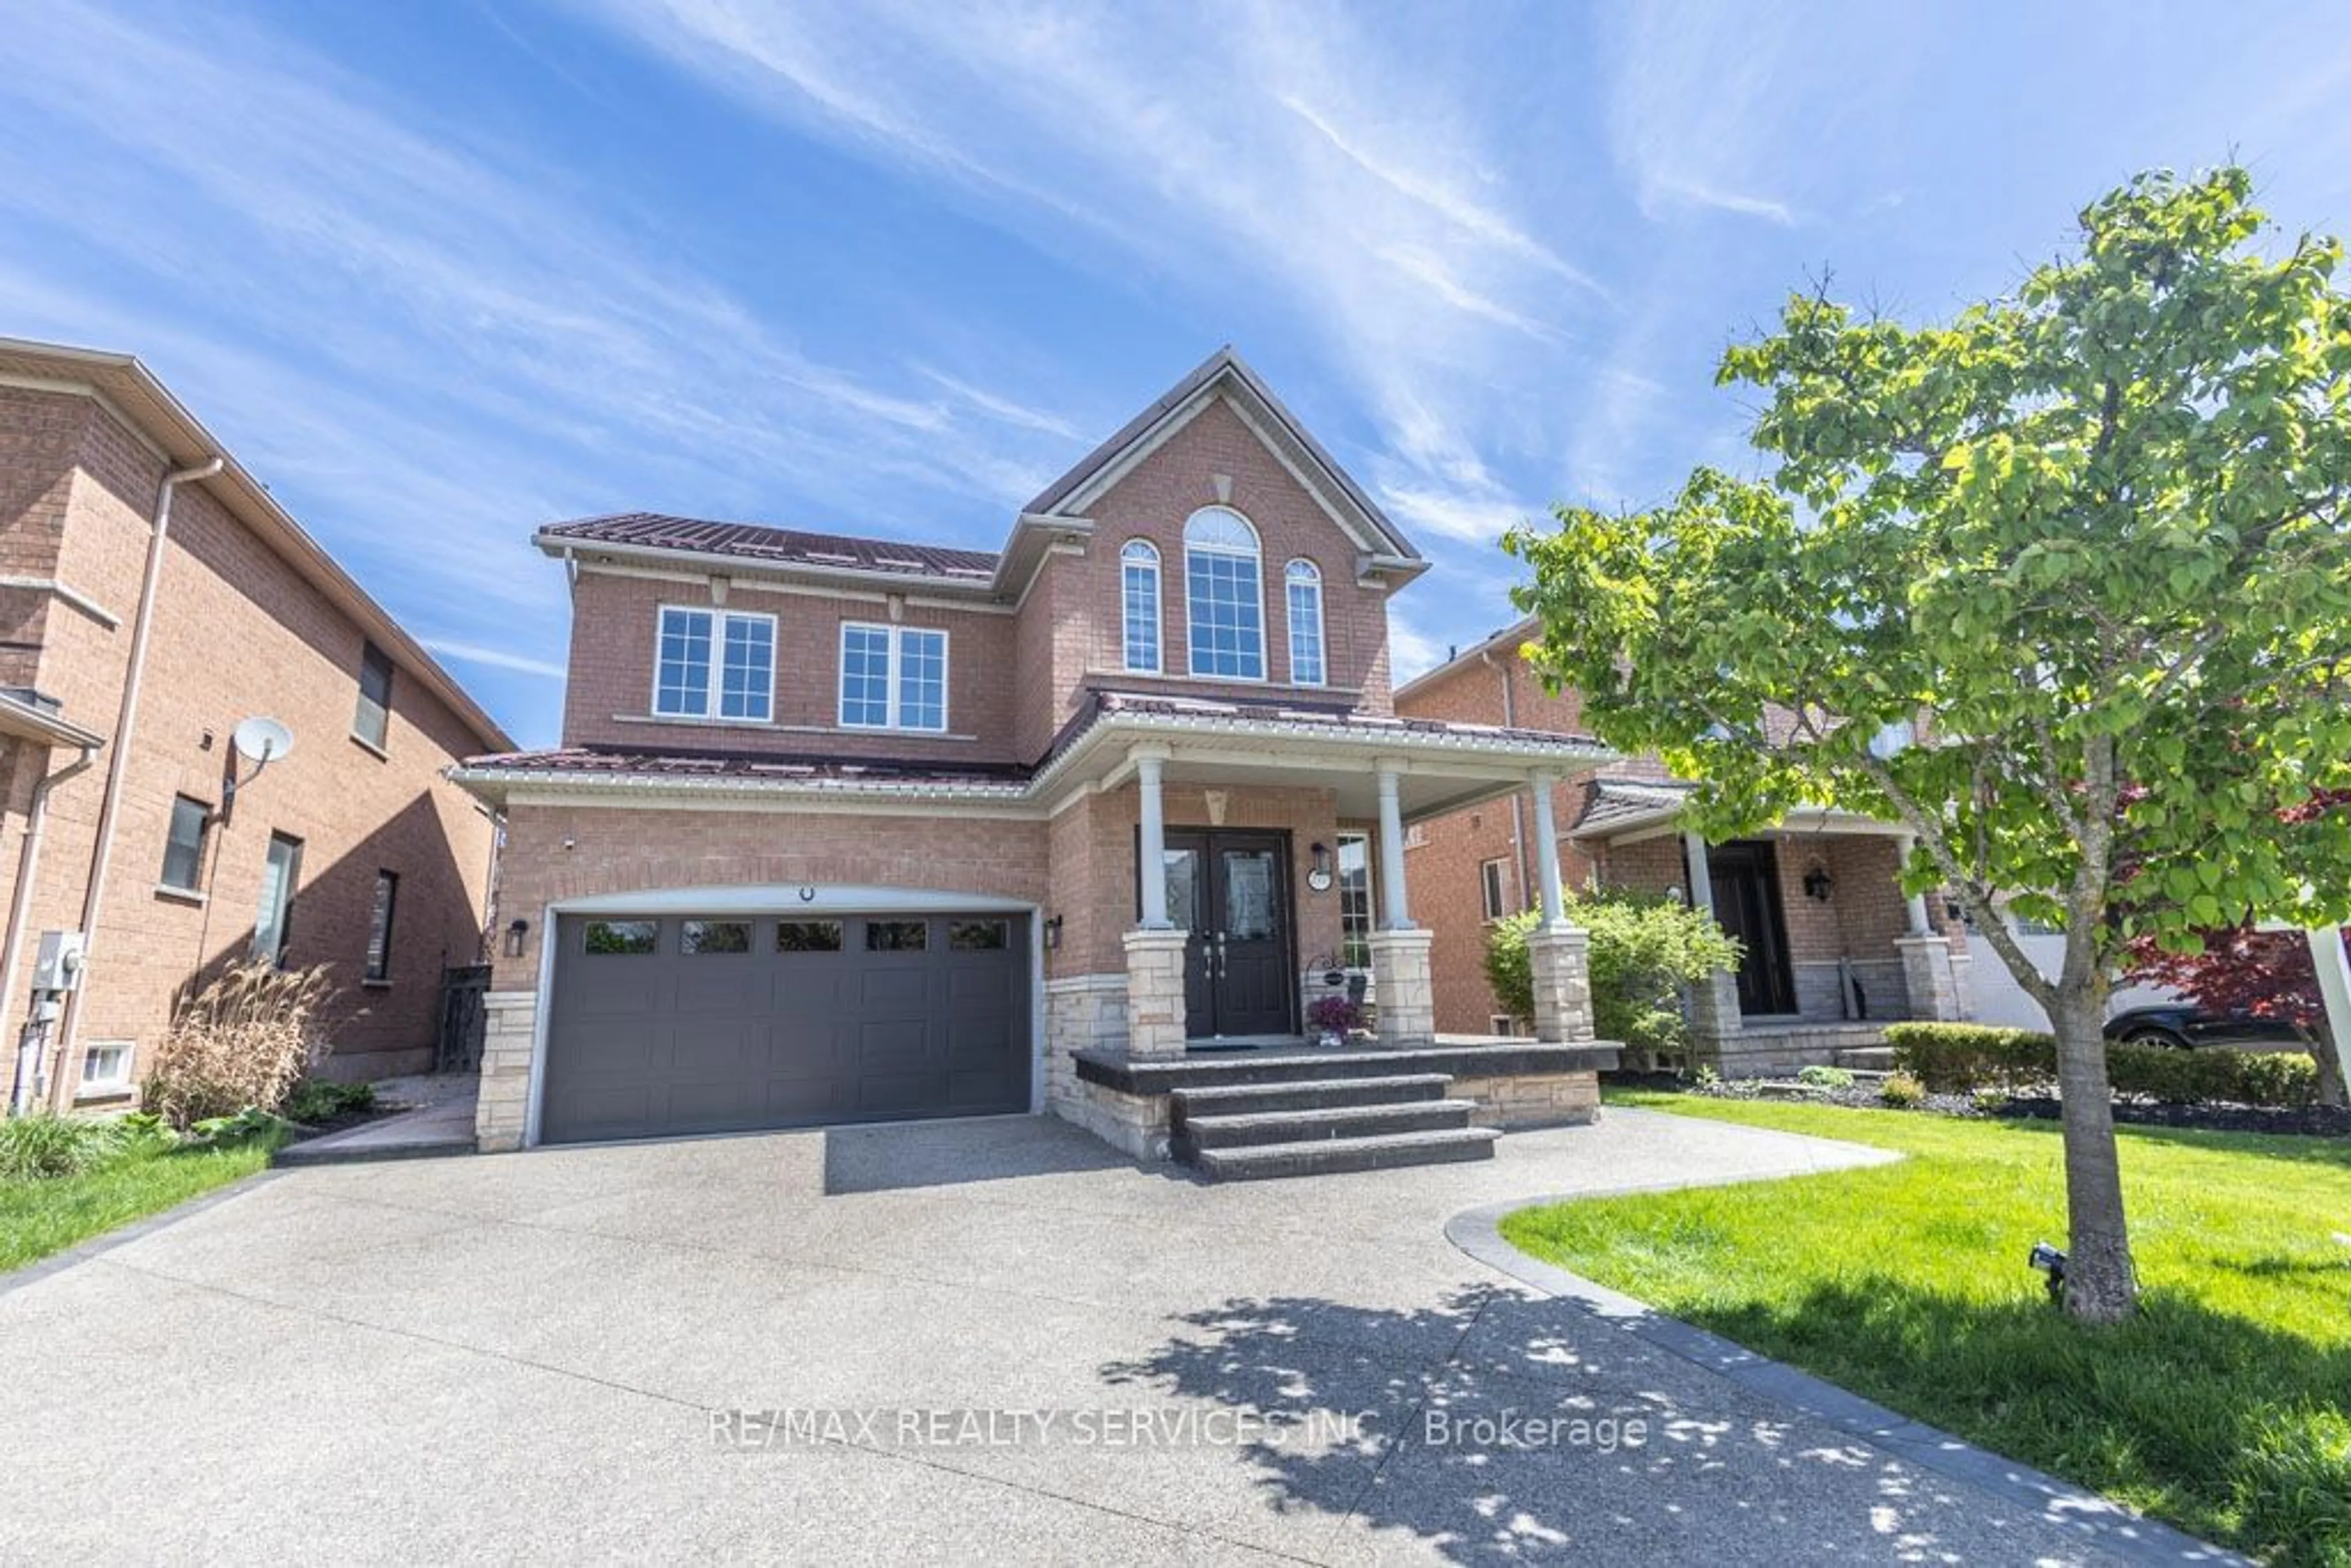 Home with brick exterior material for 2337 West Ham Rd, Oakville Ontario L6M 4N8